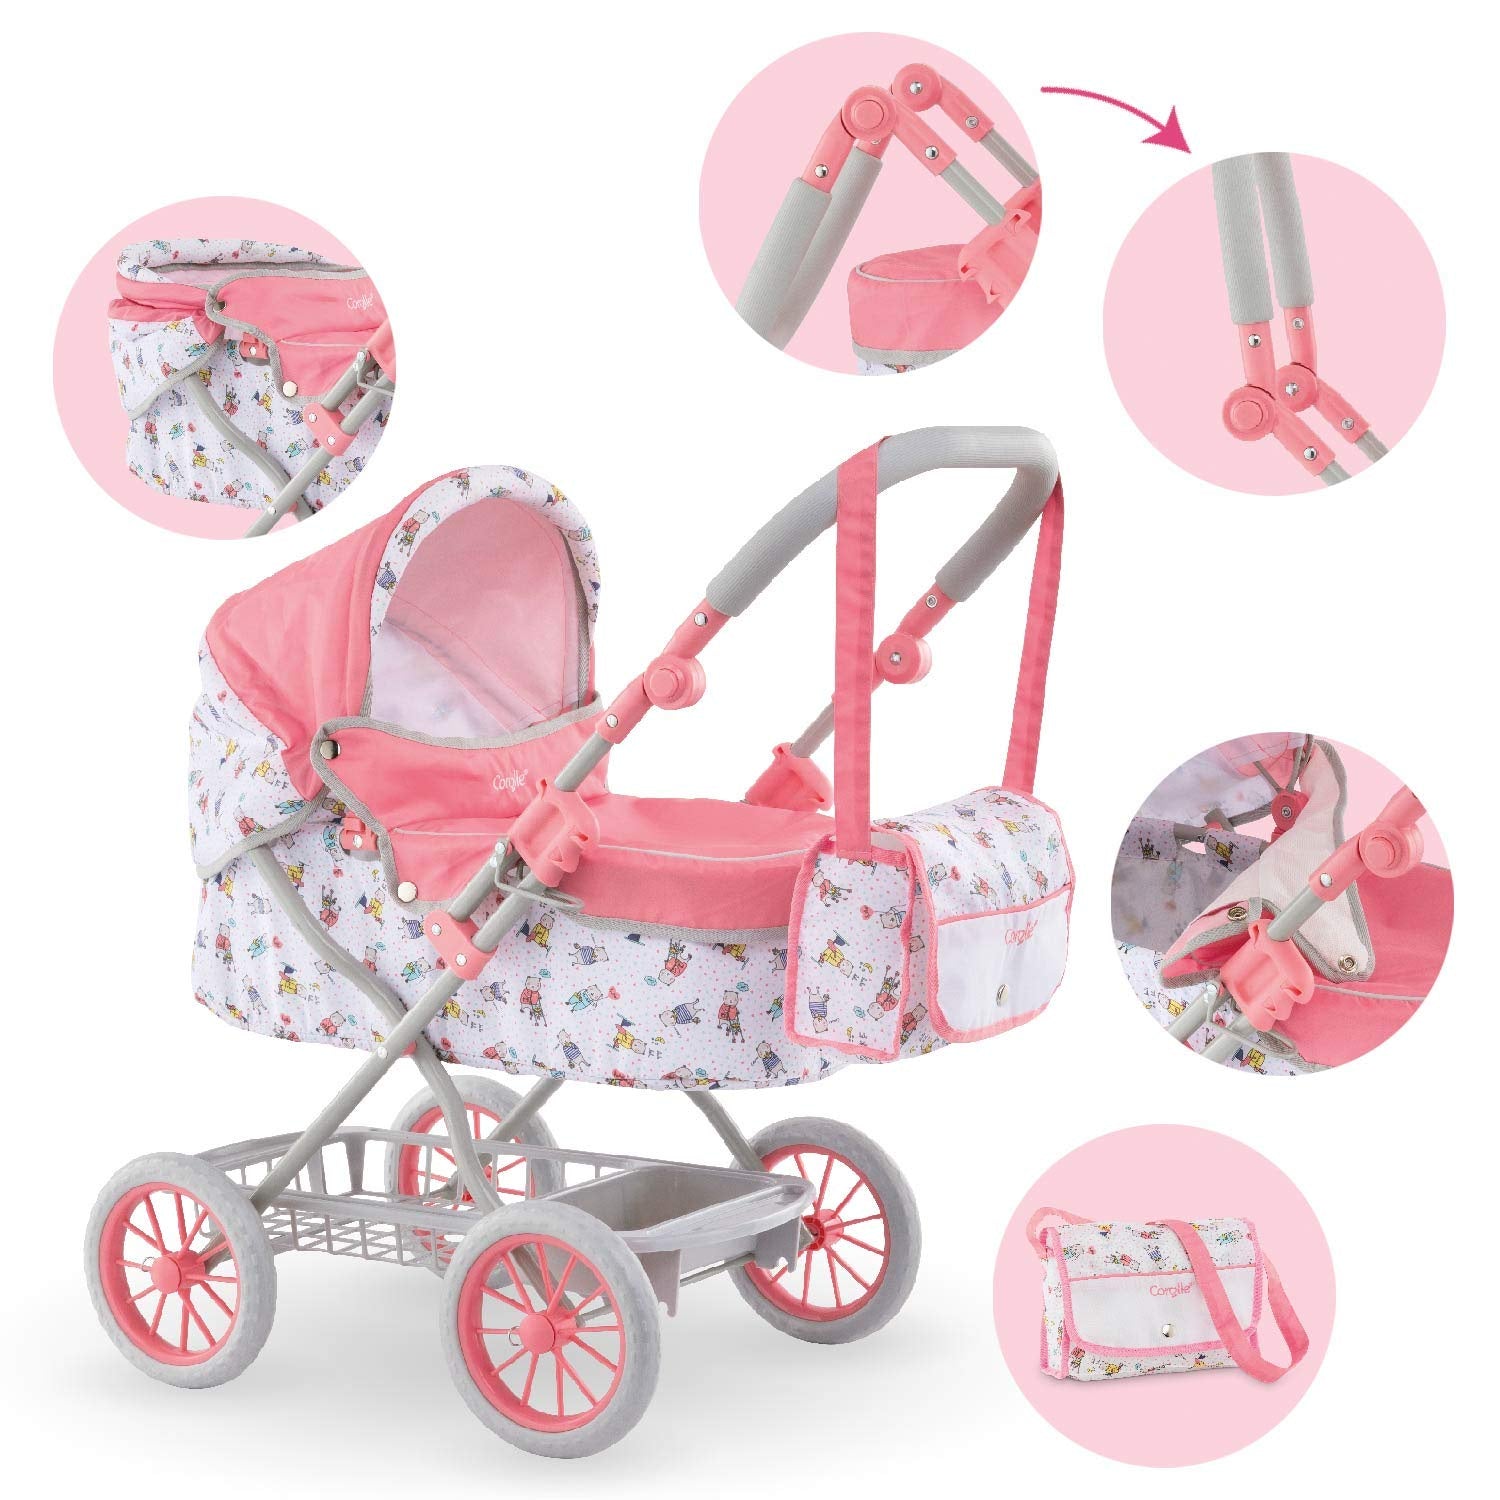 Corolle -  Doll Carriage/Pram - Pink and White